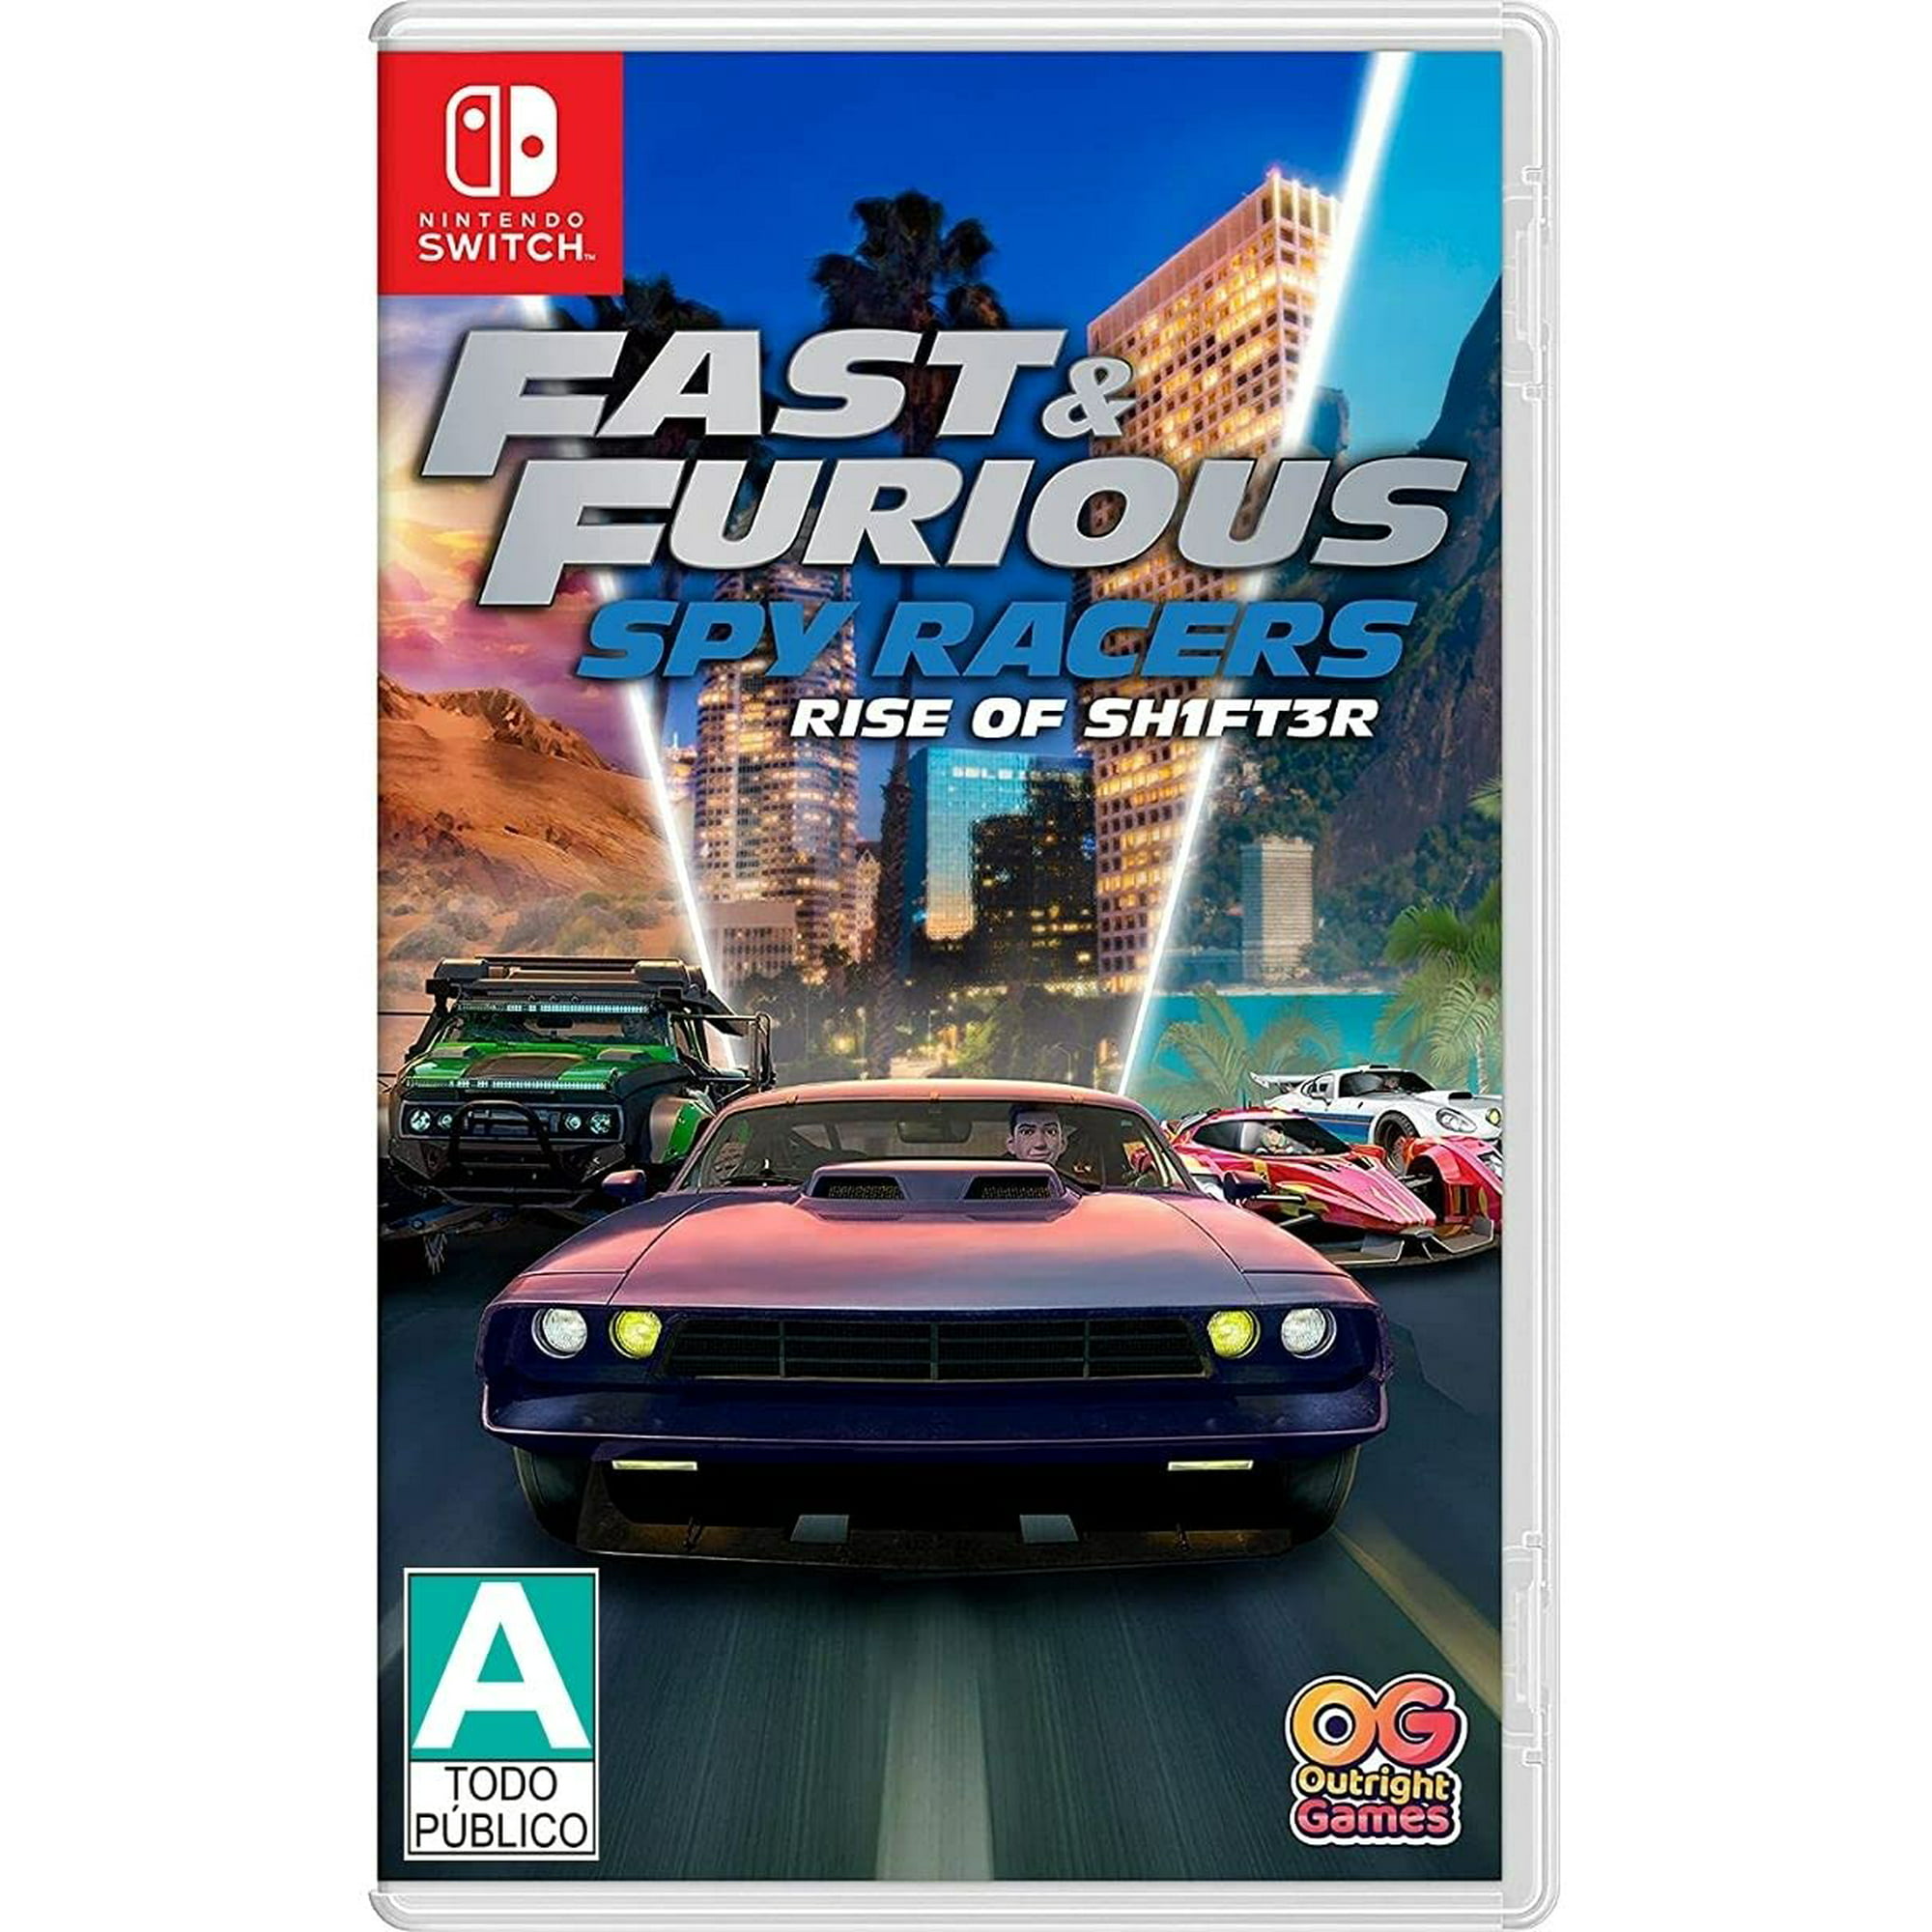 Fast & Furious: Spy Racers Rise of SH1FT3R Nintendo Nintendo Switch